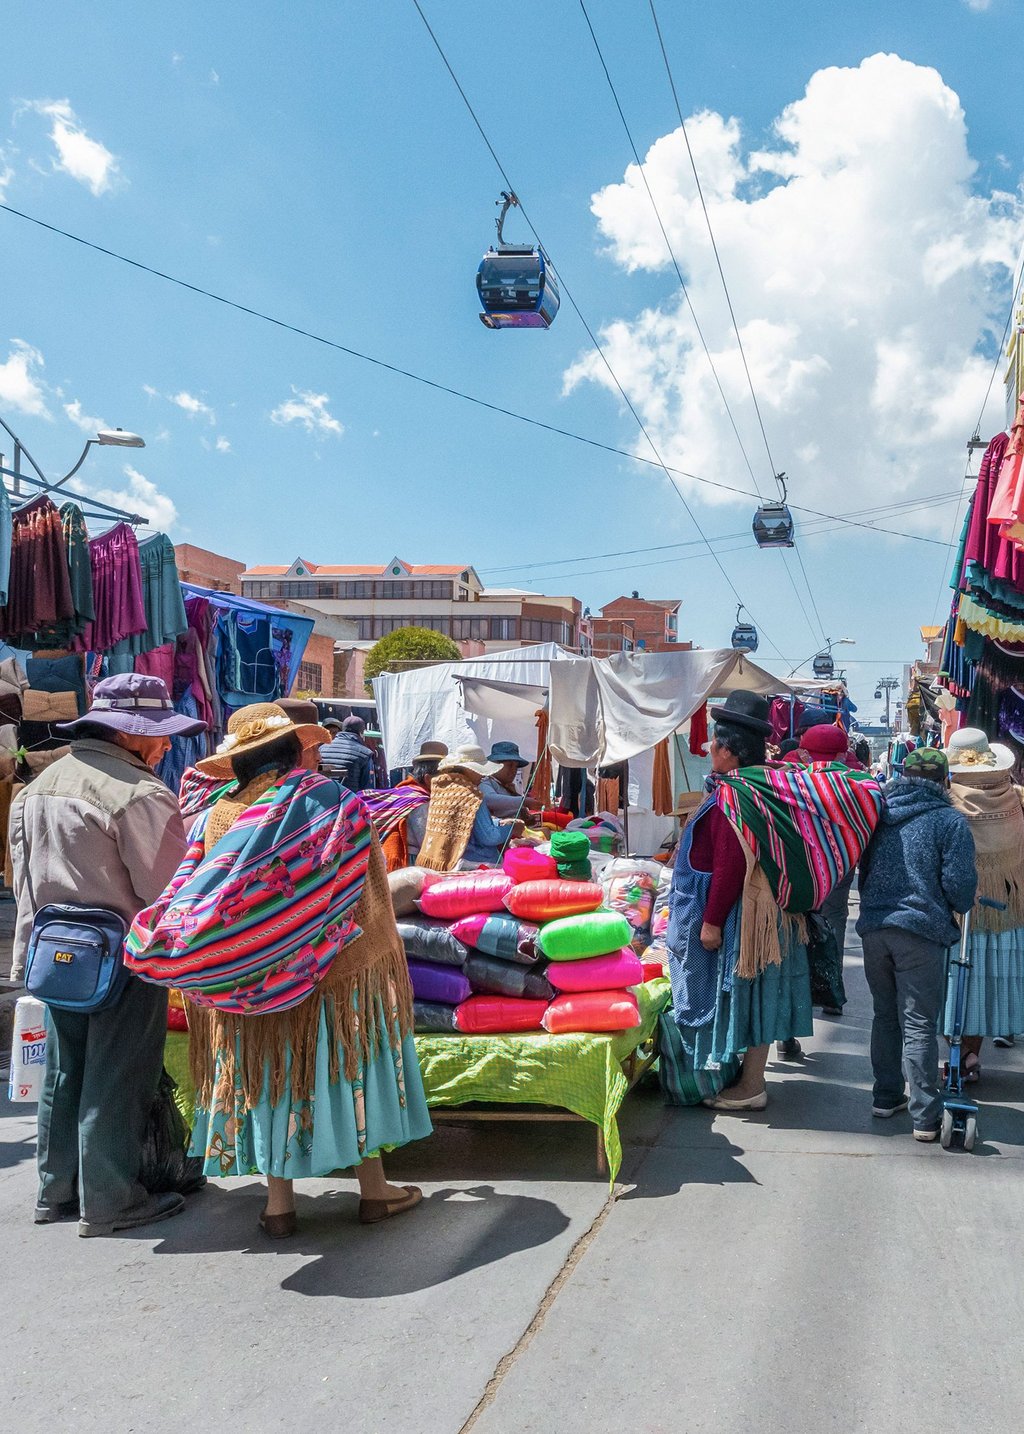 Photo of a market in La Paz, Bolivia. In the middle there is a stand with colorful fabrics where people stand. At the edges you can see stalls with hanging garments. The ropeway runs above the market situation.